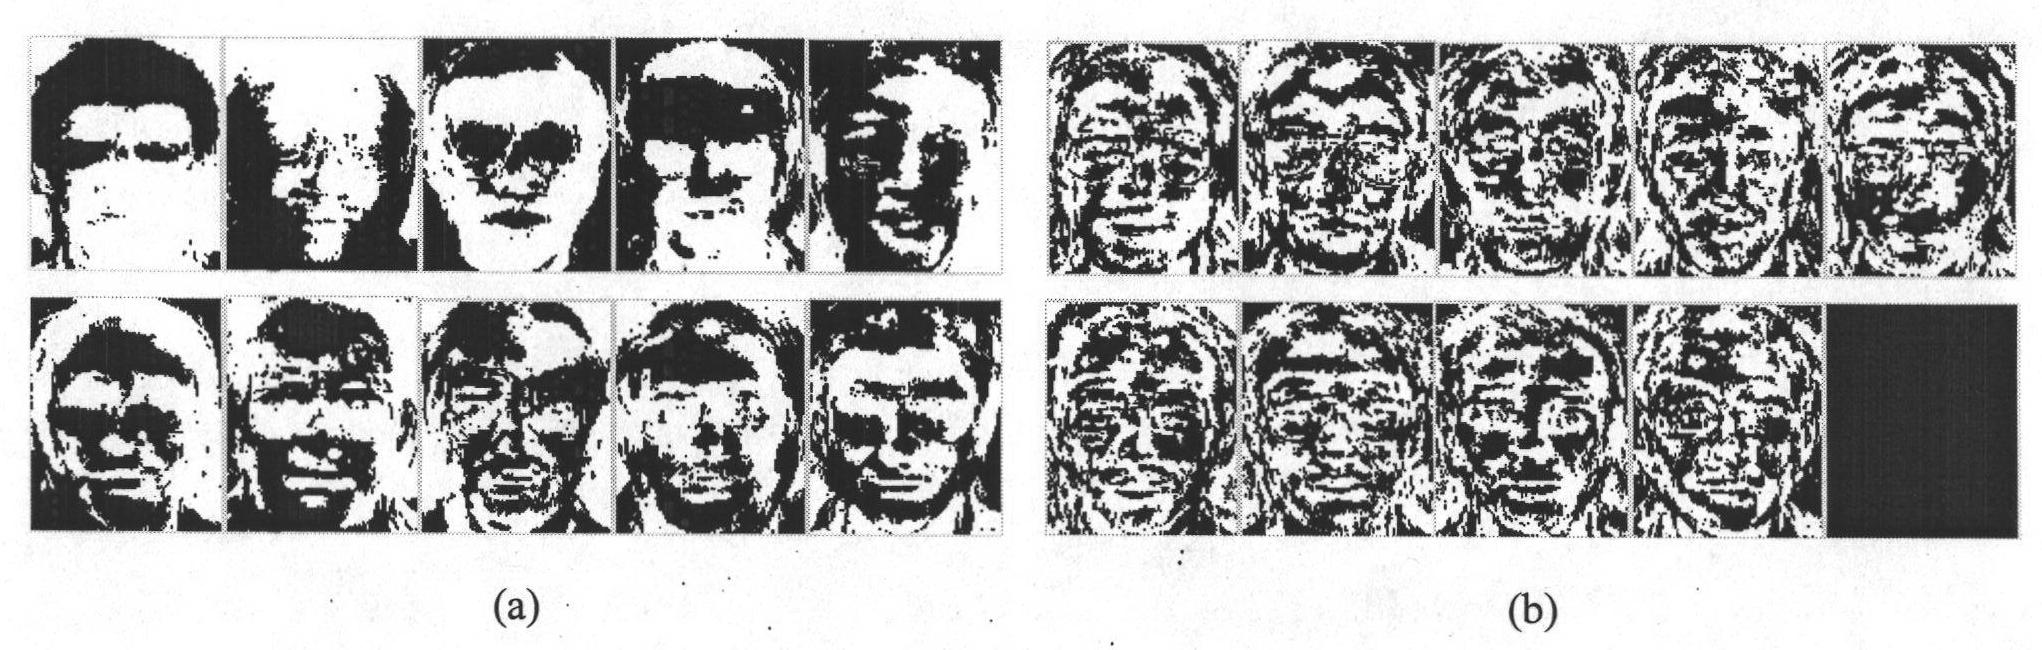 Front-face-compensation-operator-based multi-pose human face recognition method